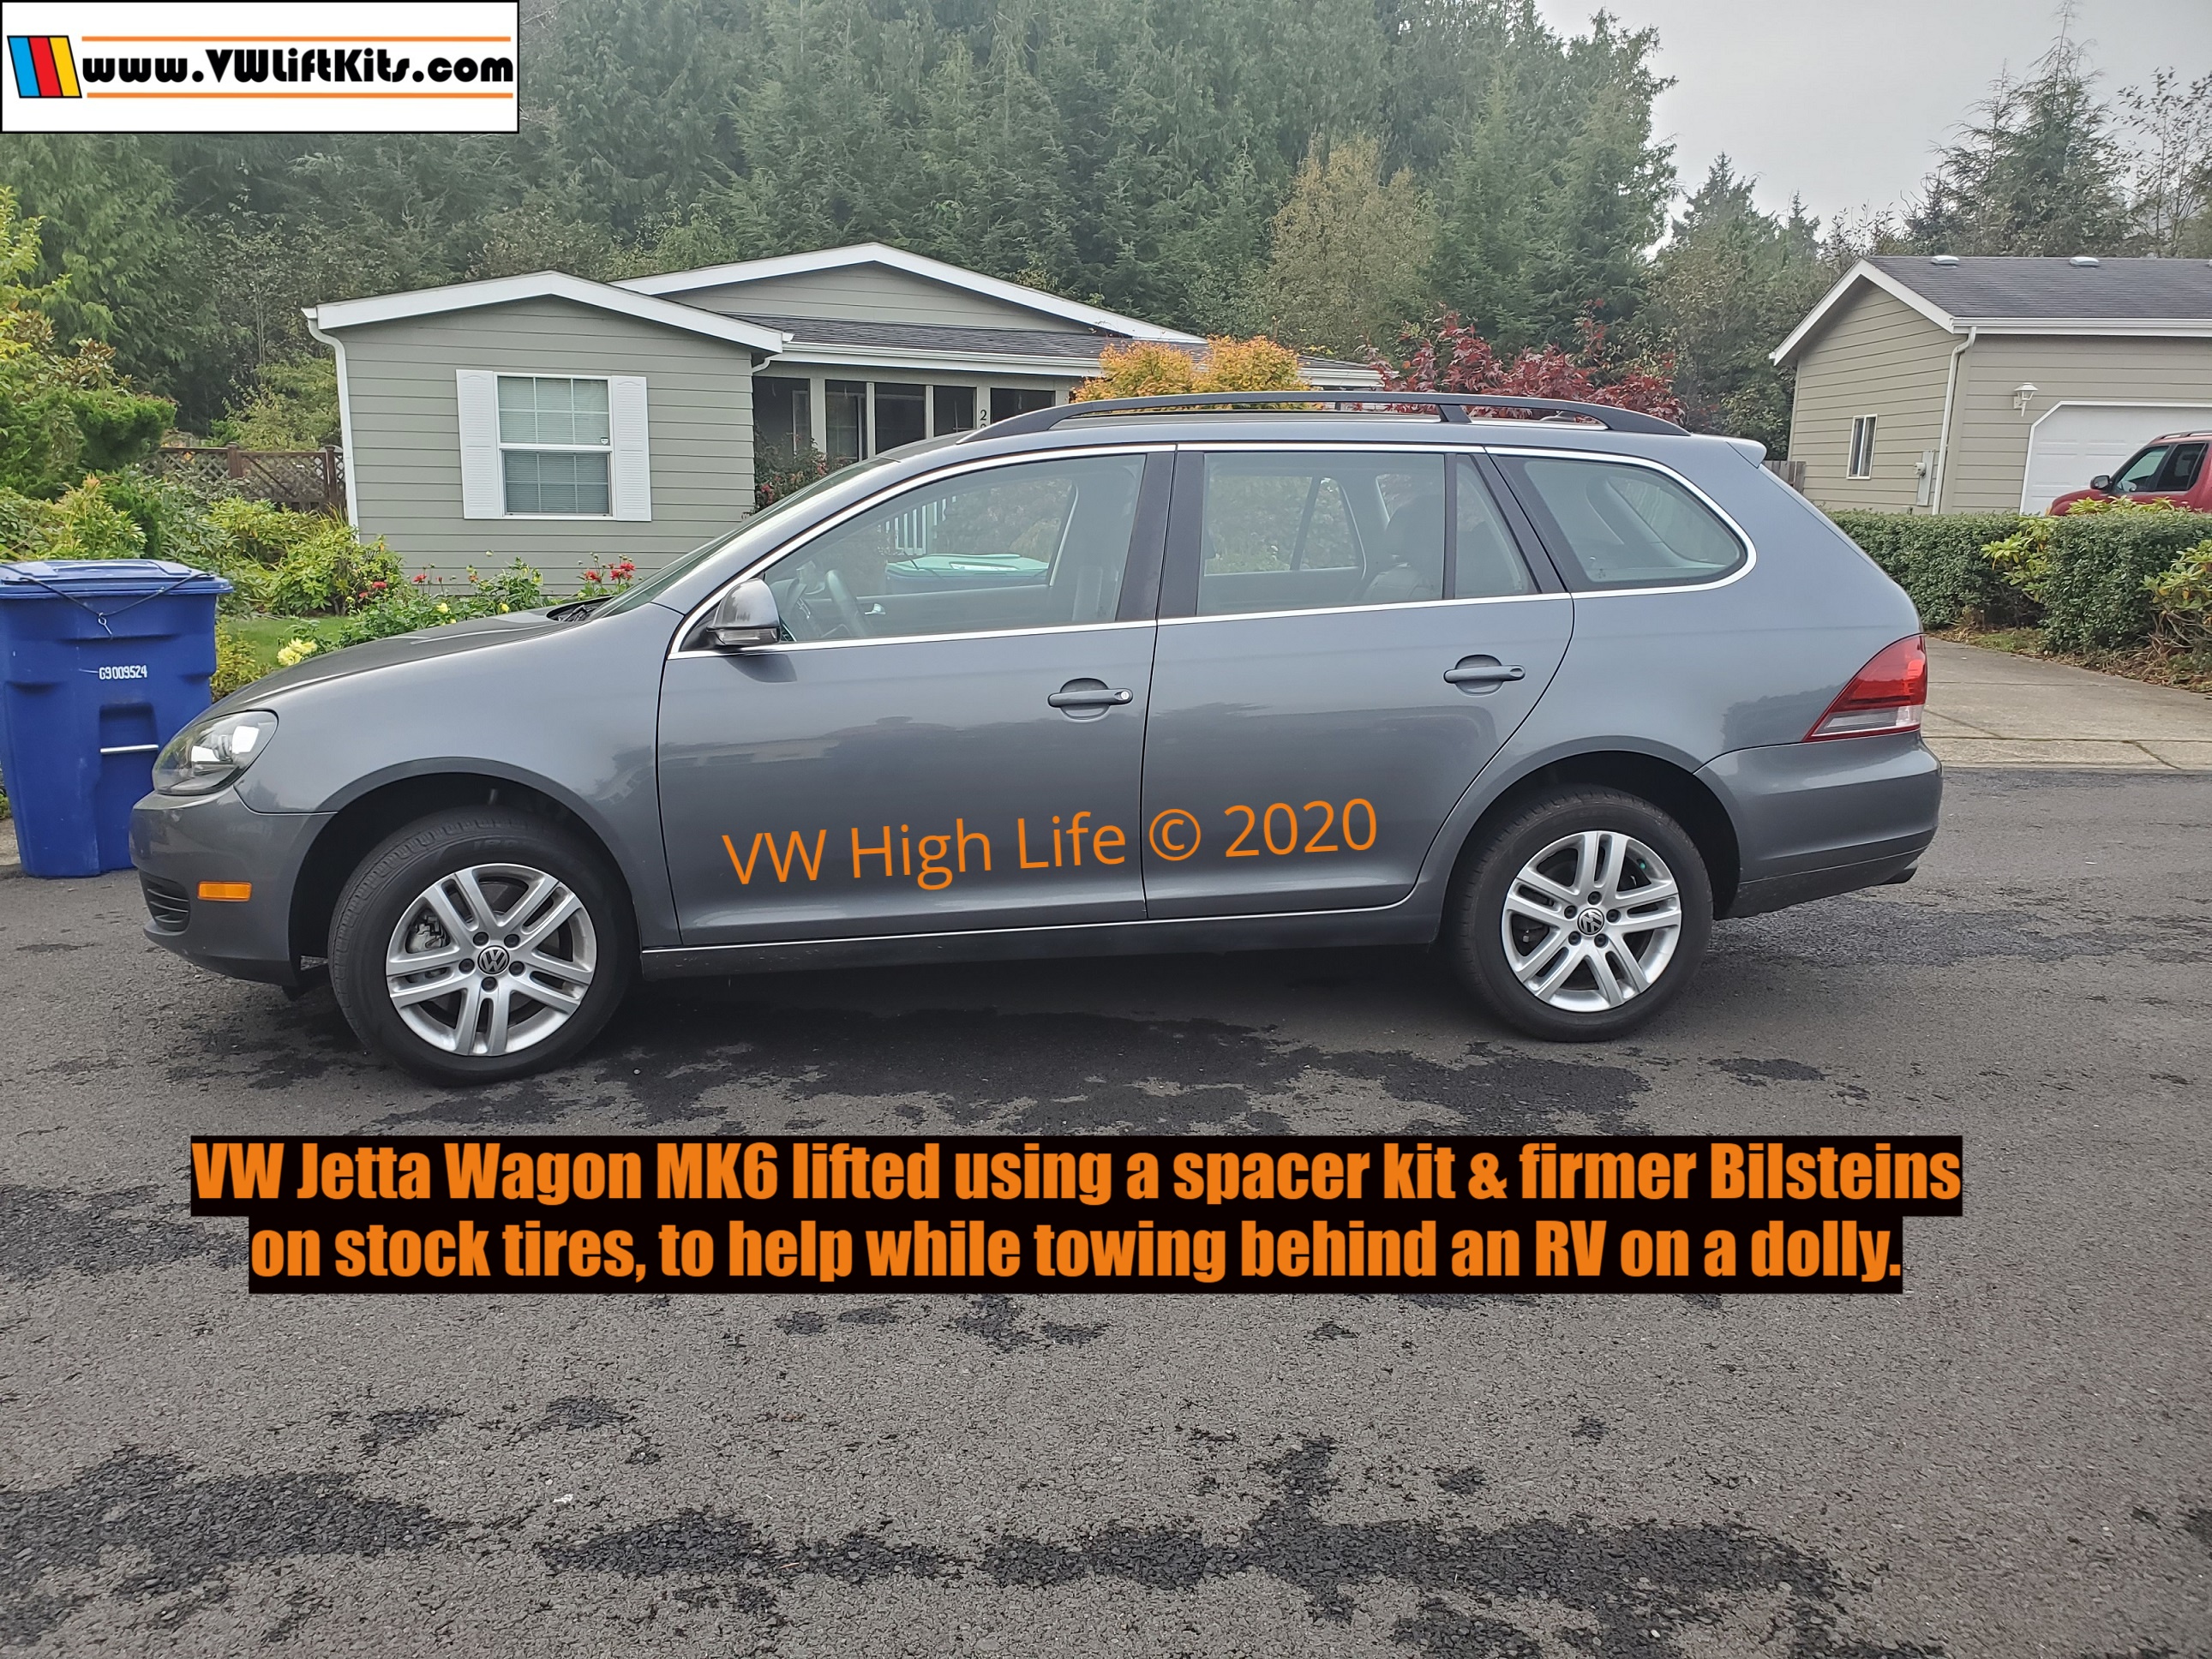 2014 Jetta Wagon lifted properly using a 1.25-inch spacer kit, firmer Bilsteins, new German brand top mounts & bump stops.